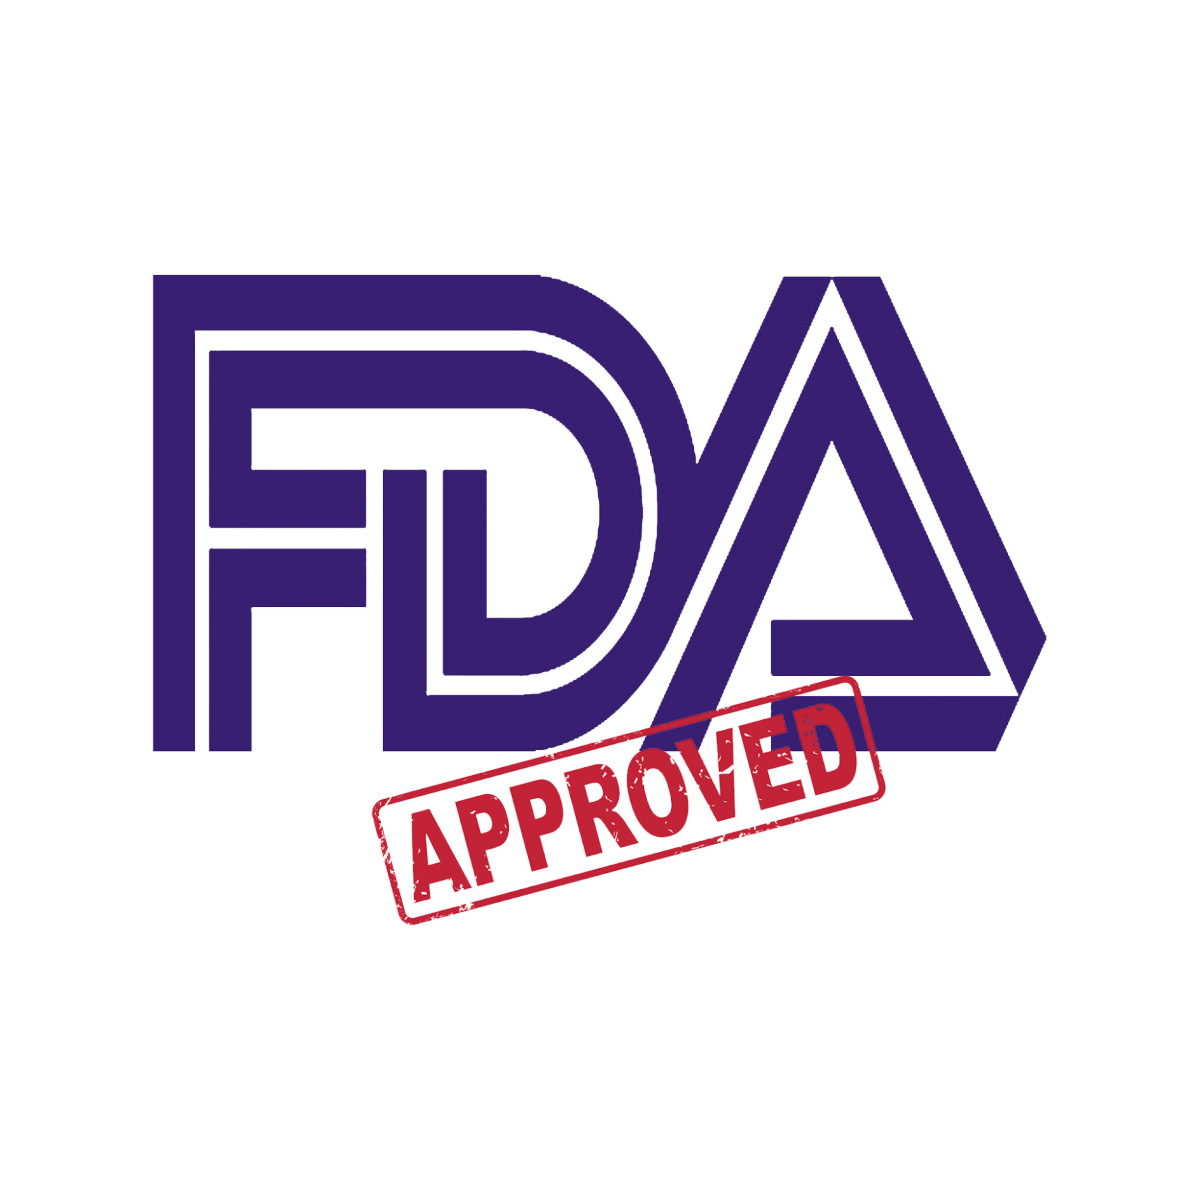 FDA Grants Approval of Supplemental New Drug Application (sNDA) for Takeda's ICLUSIG® (ponatinib) in Adult Patients with Newly Diagnosed Ph+ ALL